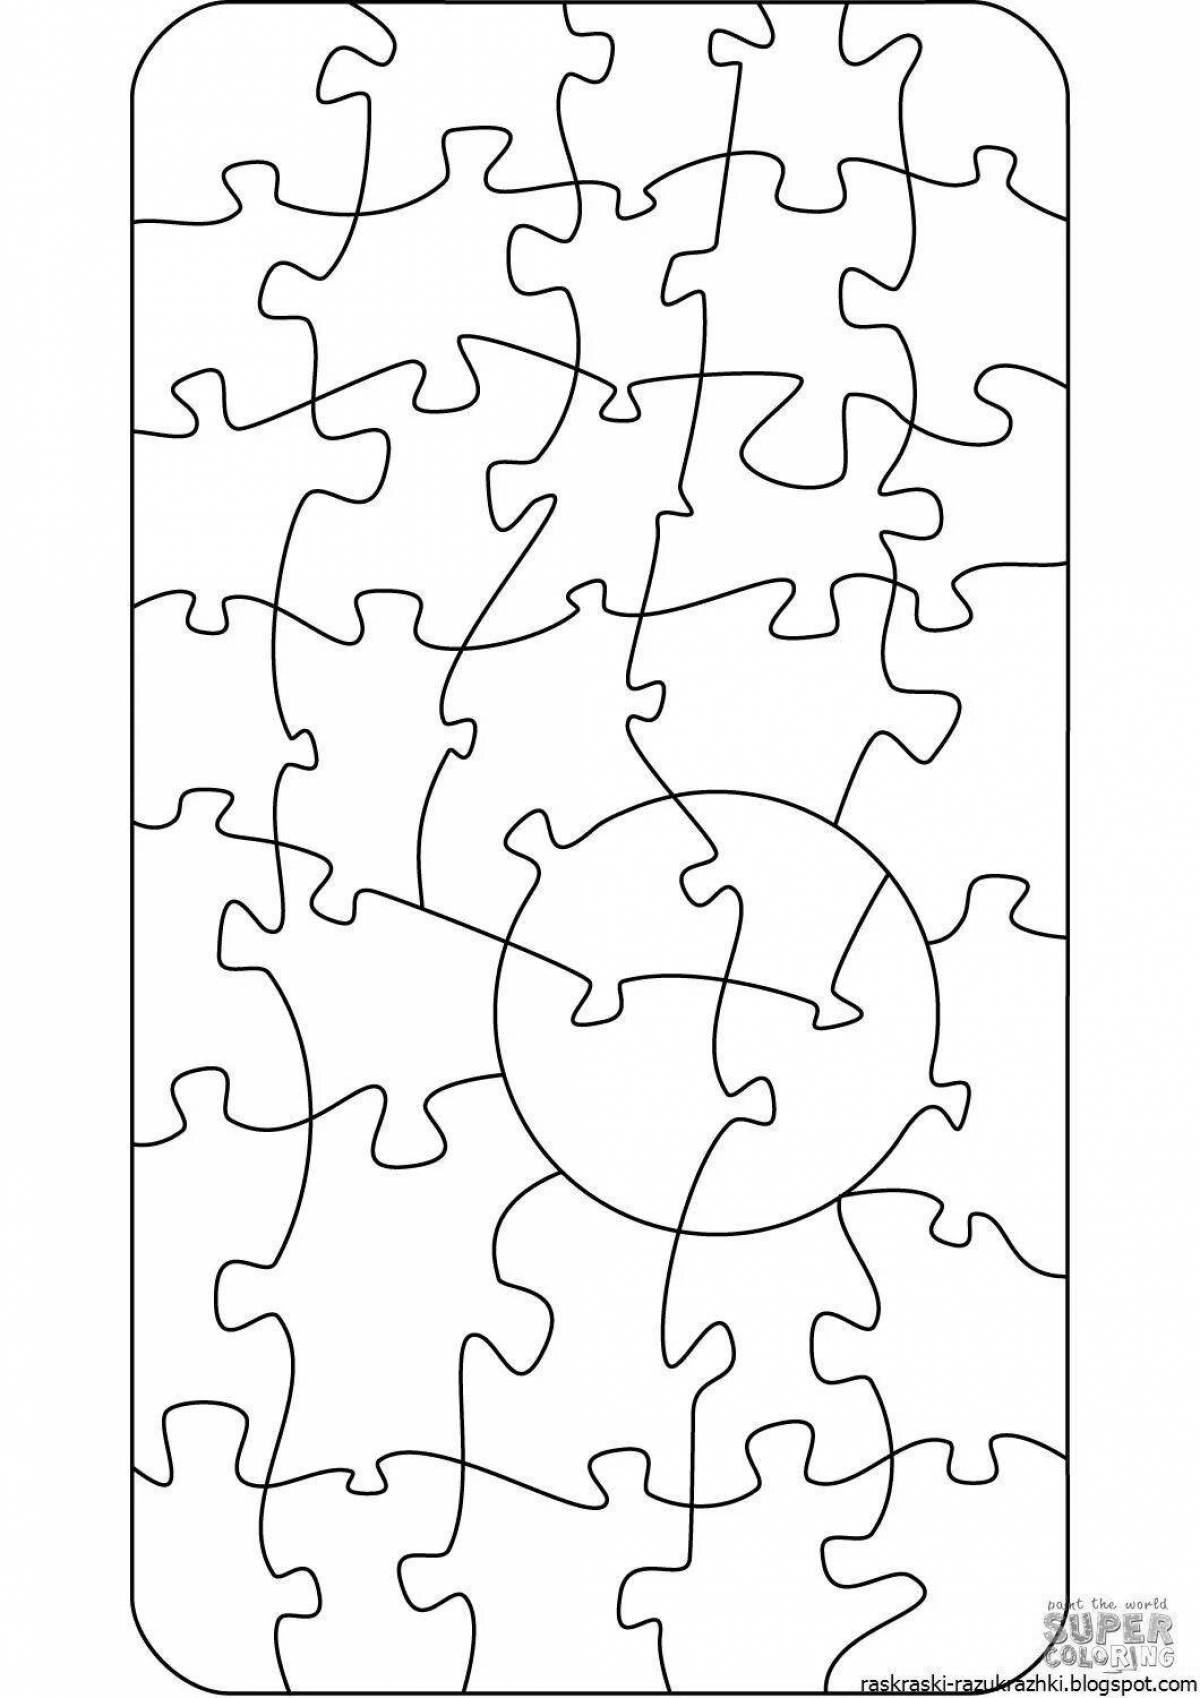 Fun puzzles for kids 3-4 years old